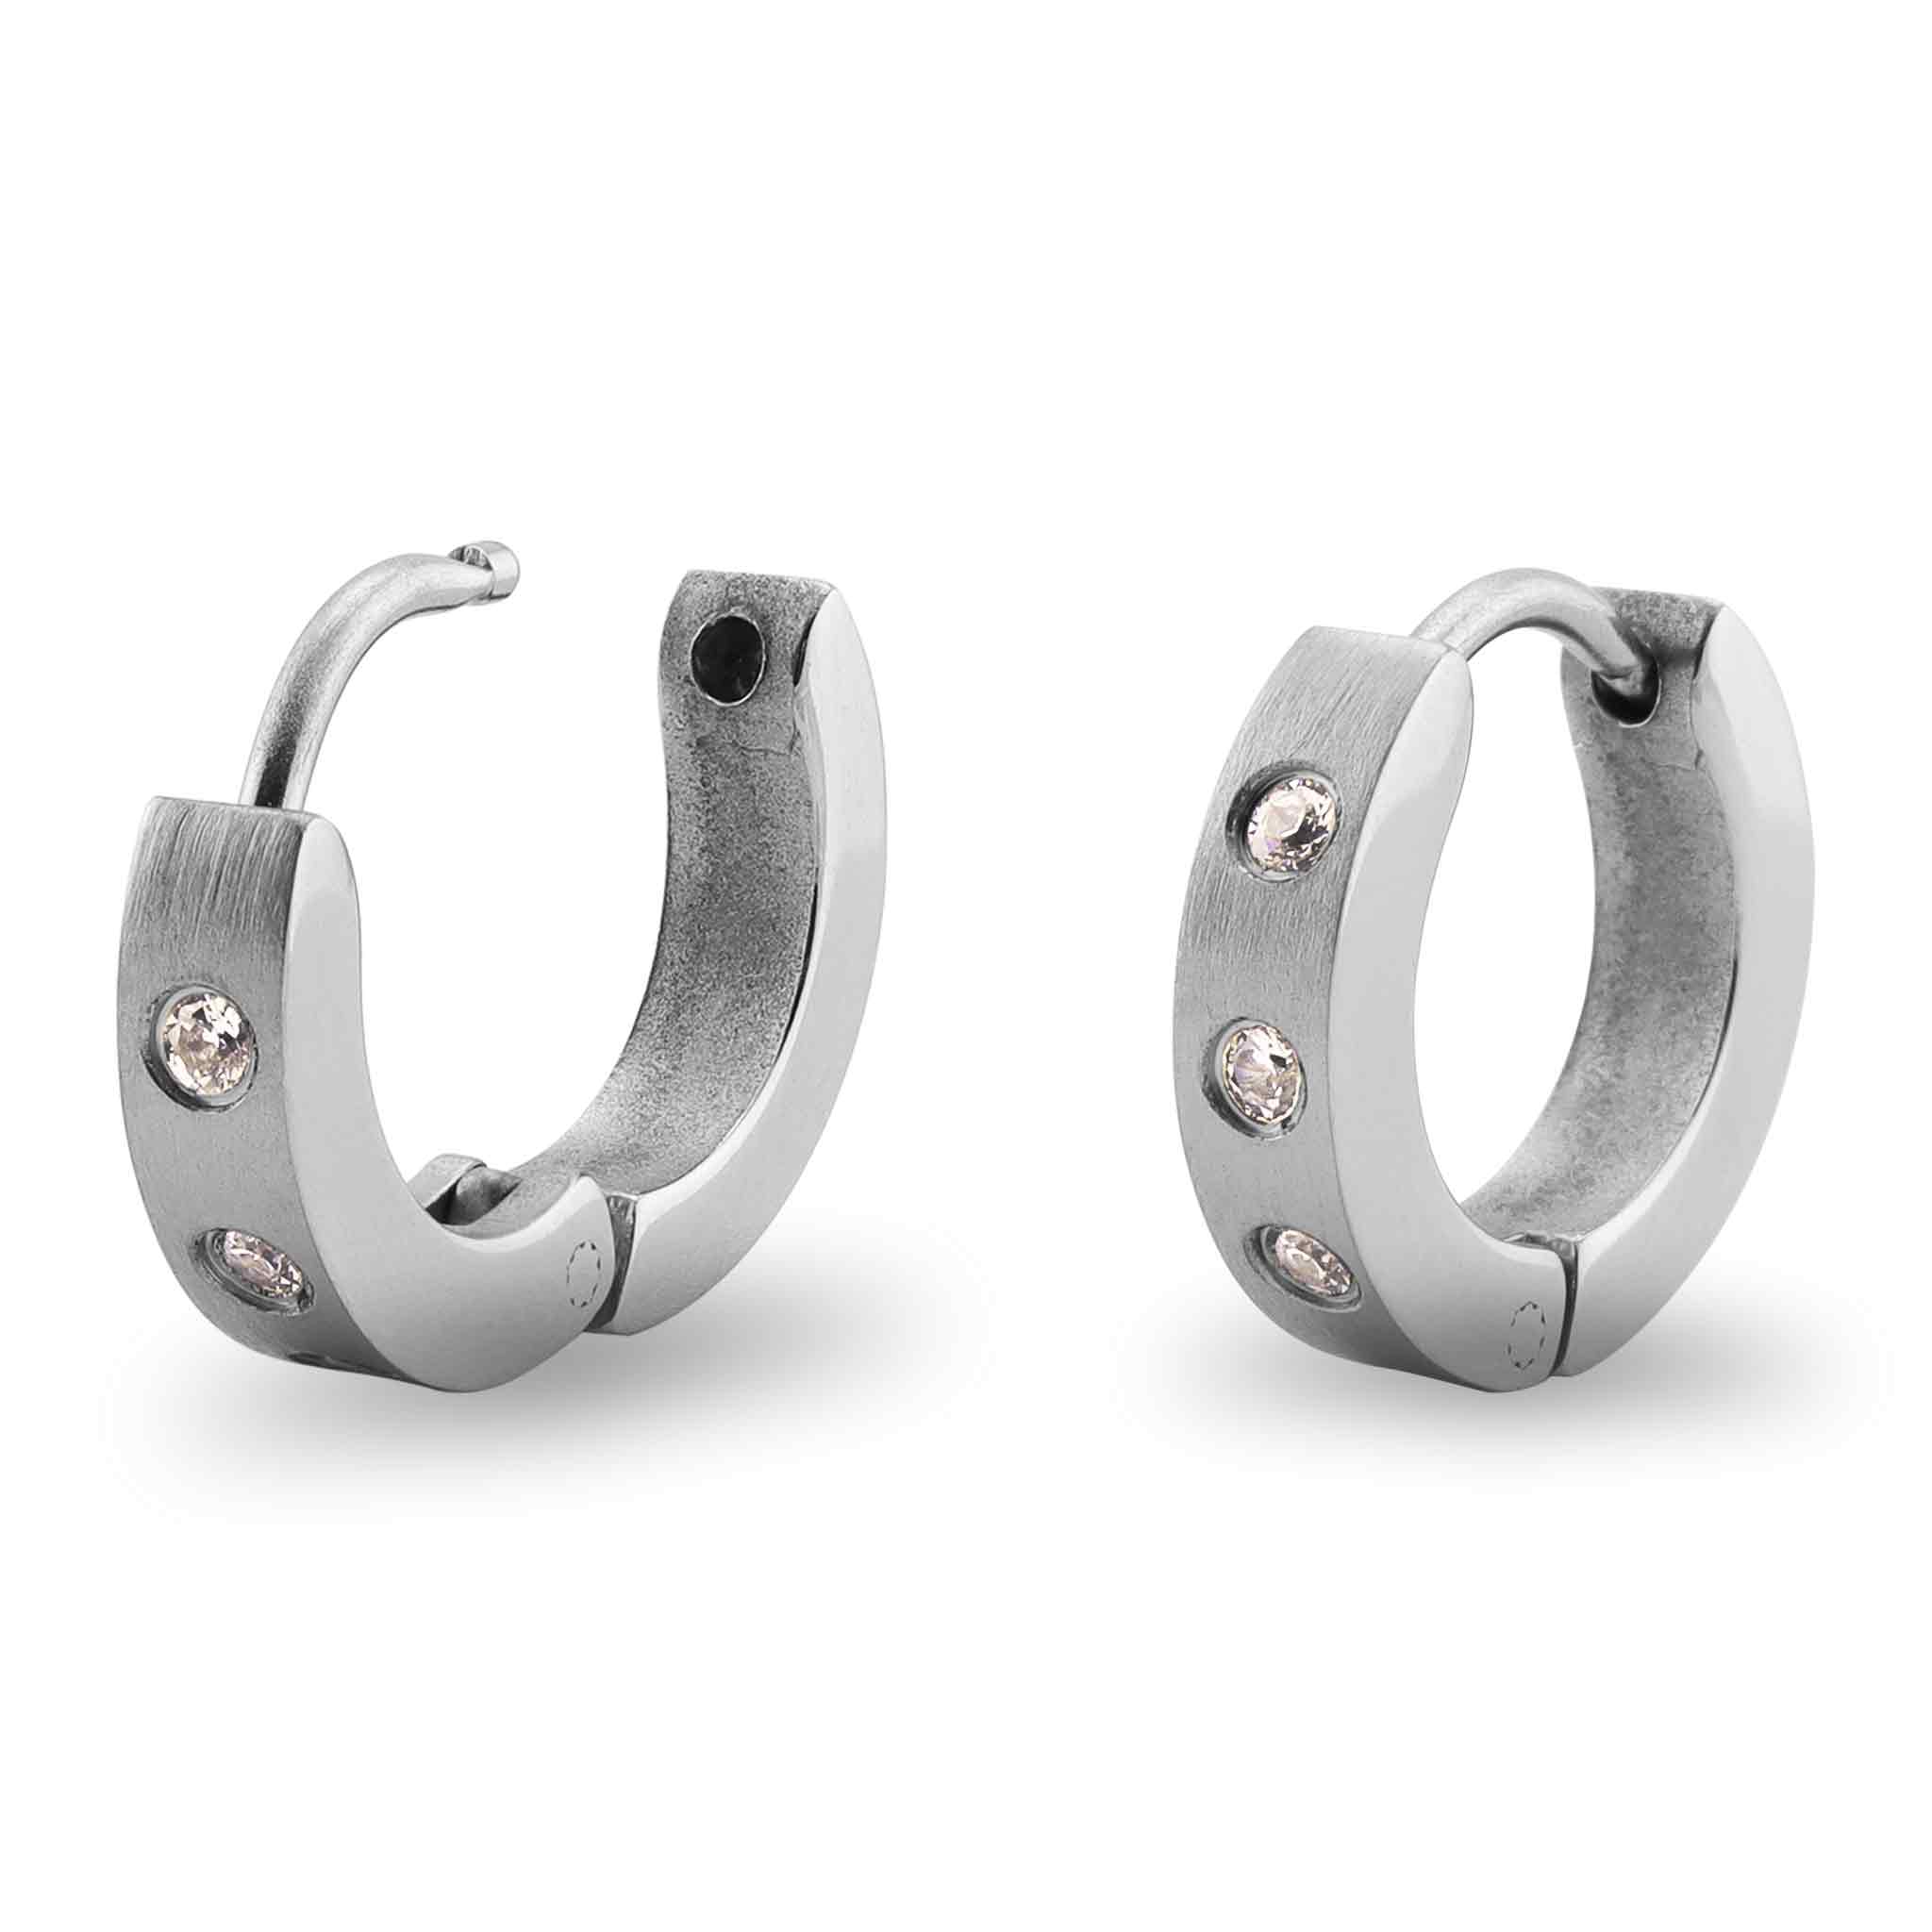 Stainless Steel PVD Round Magnetic Clasp - 6mm, 8mm, 10mm / SBB0329